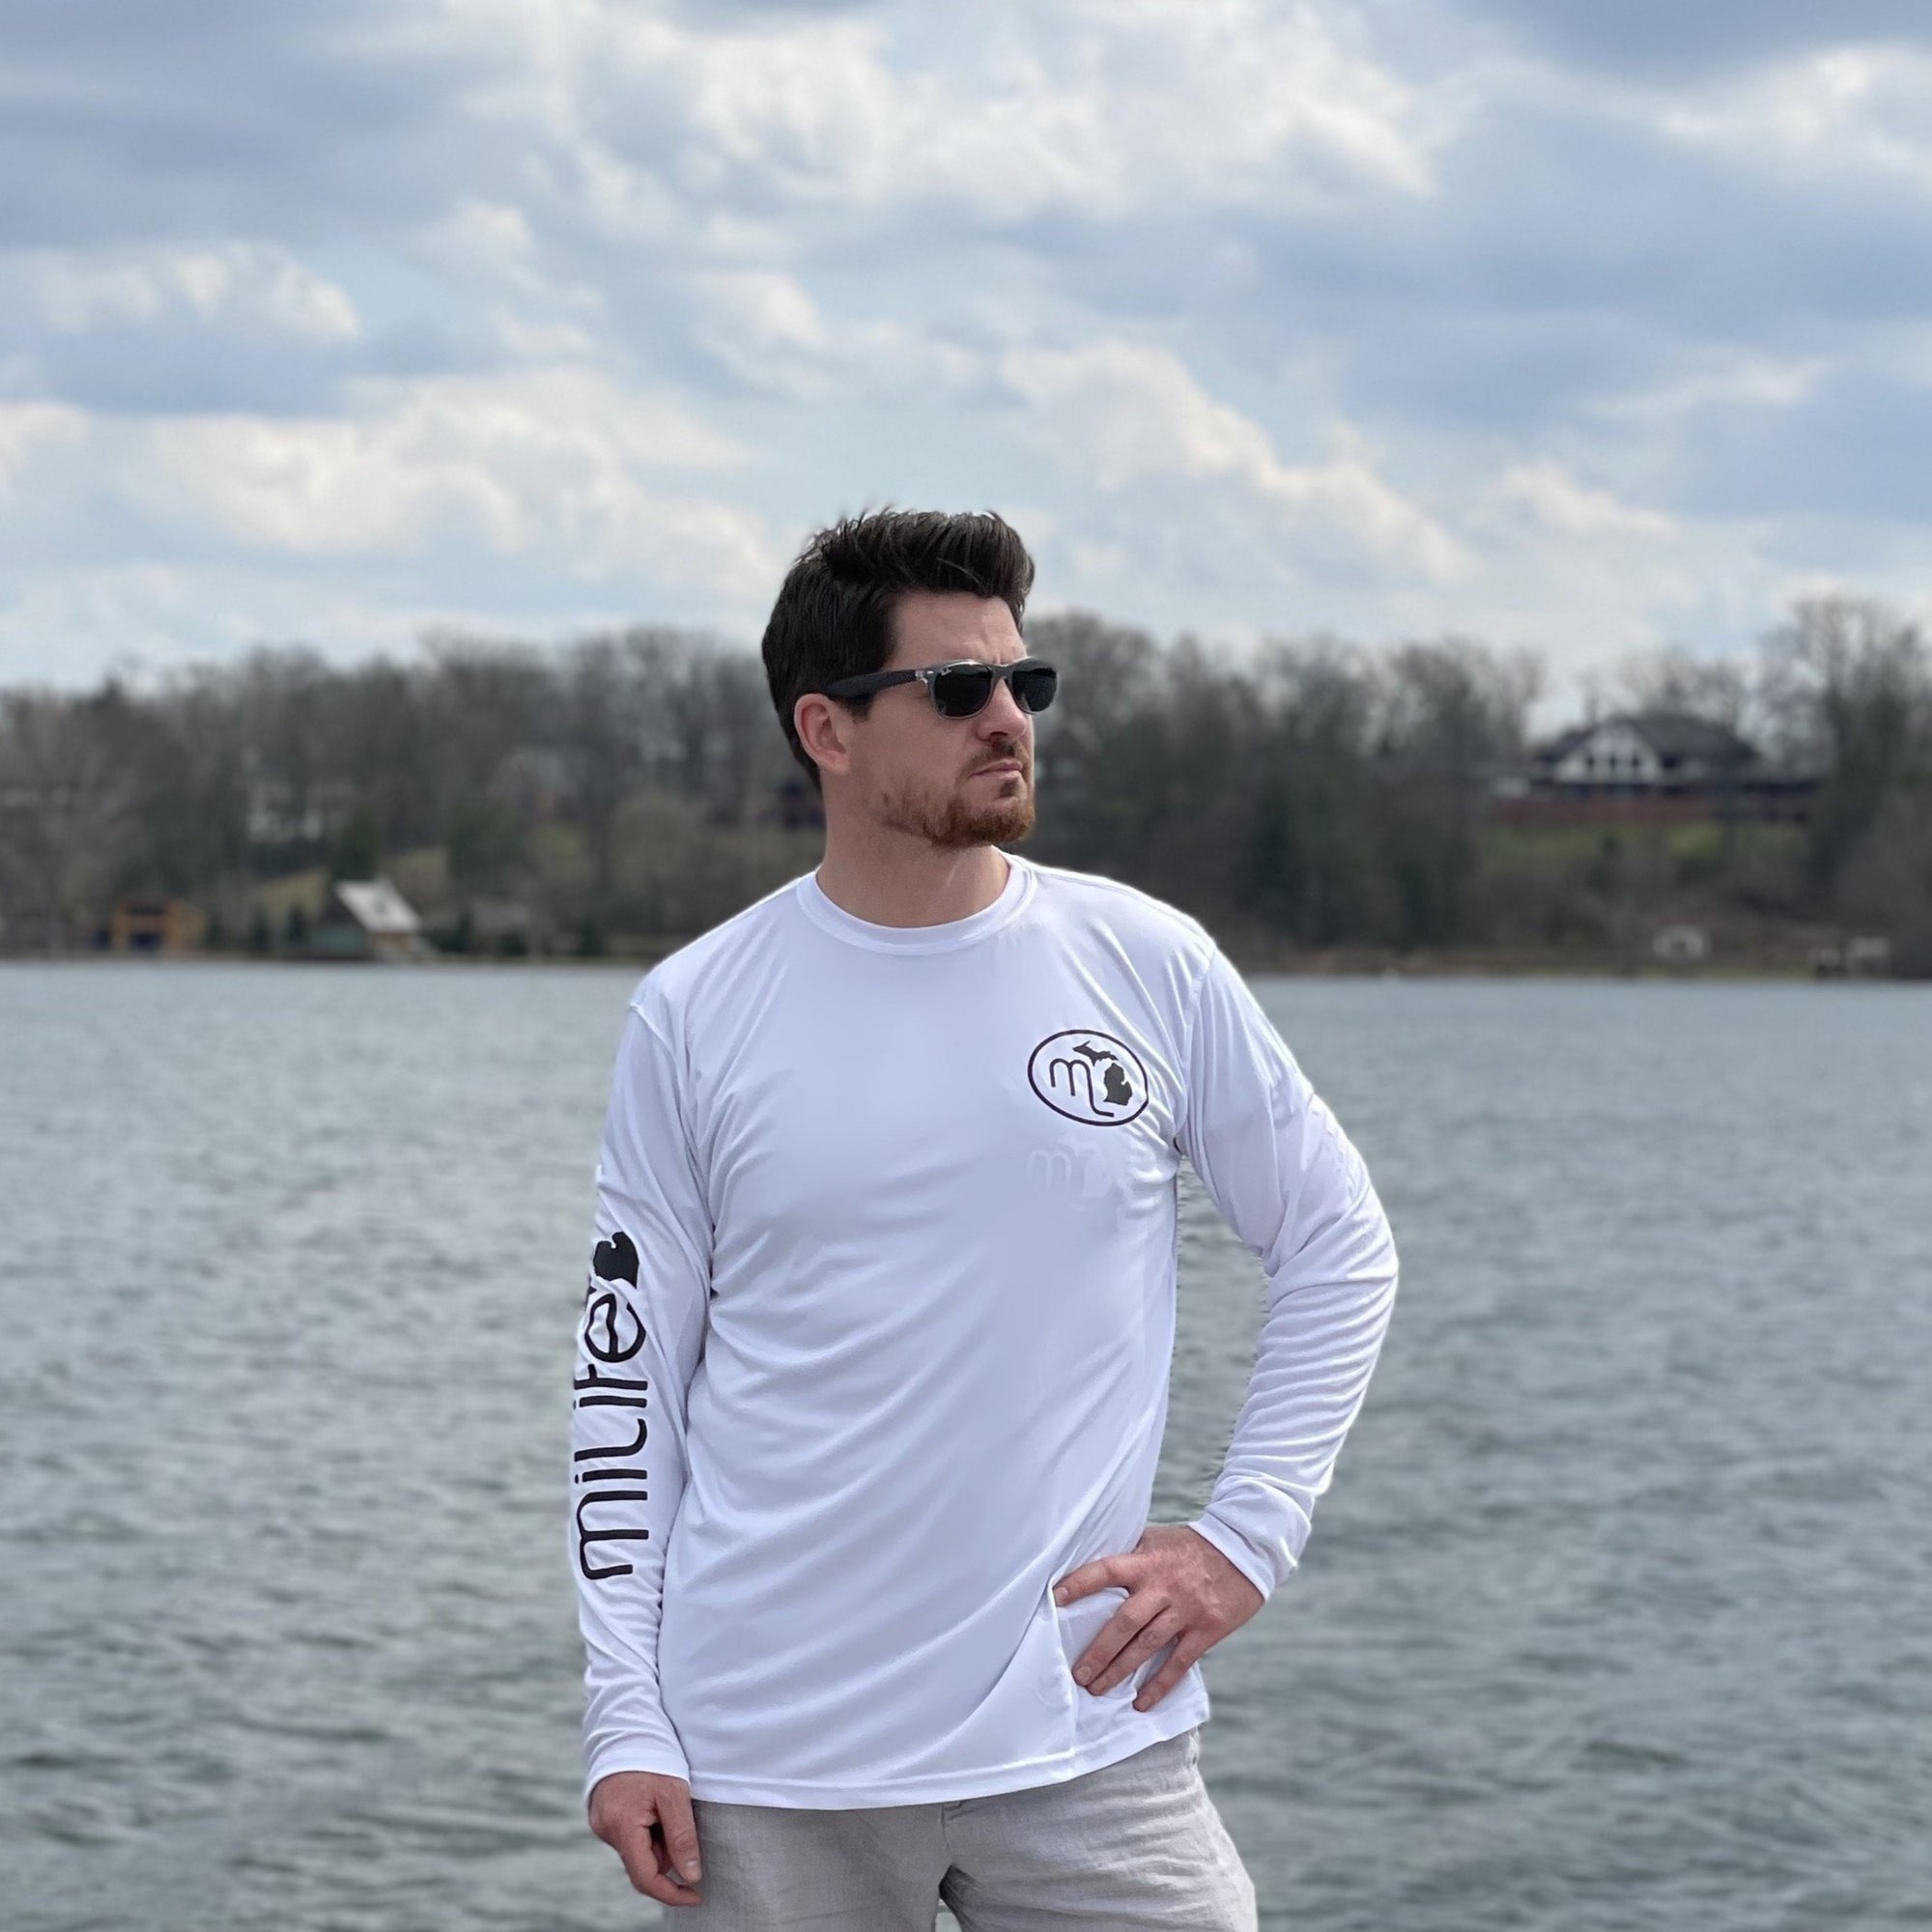 UV longsleeve Milife shirts are perfect for the Michigan summer. If you are at the lake in Grand Haven, traverse city, Detroit, east Lansing, of grand rapids, our long sleeve t-shirts are perfect and comfortable for any occasion. 